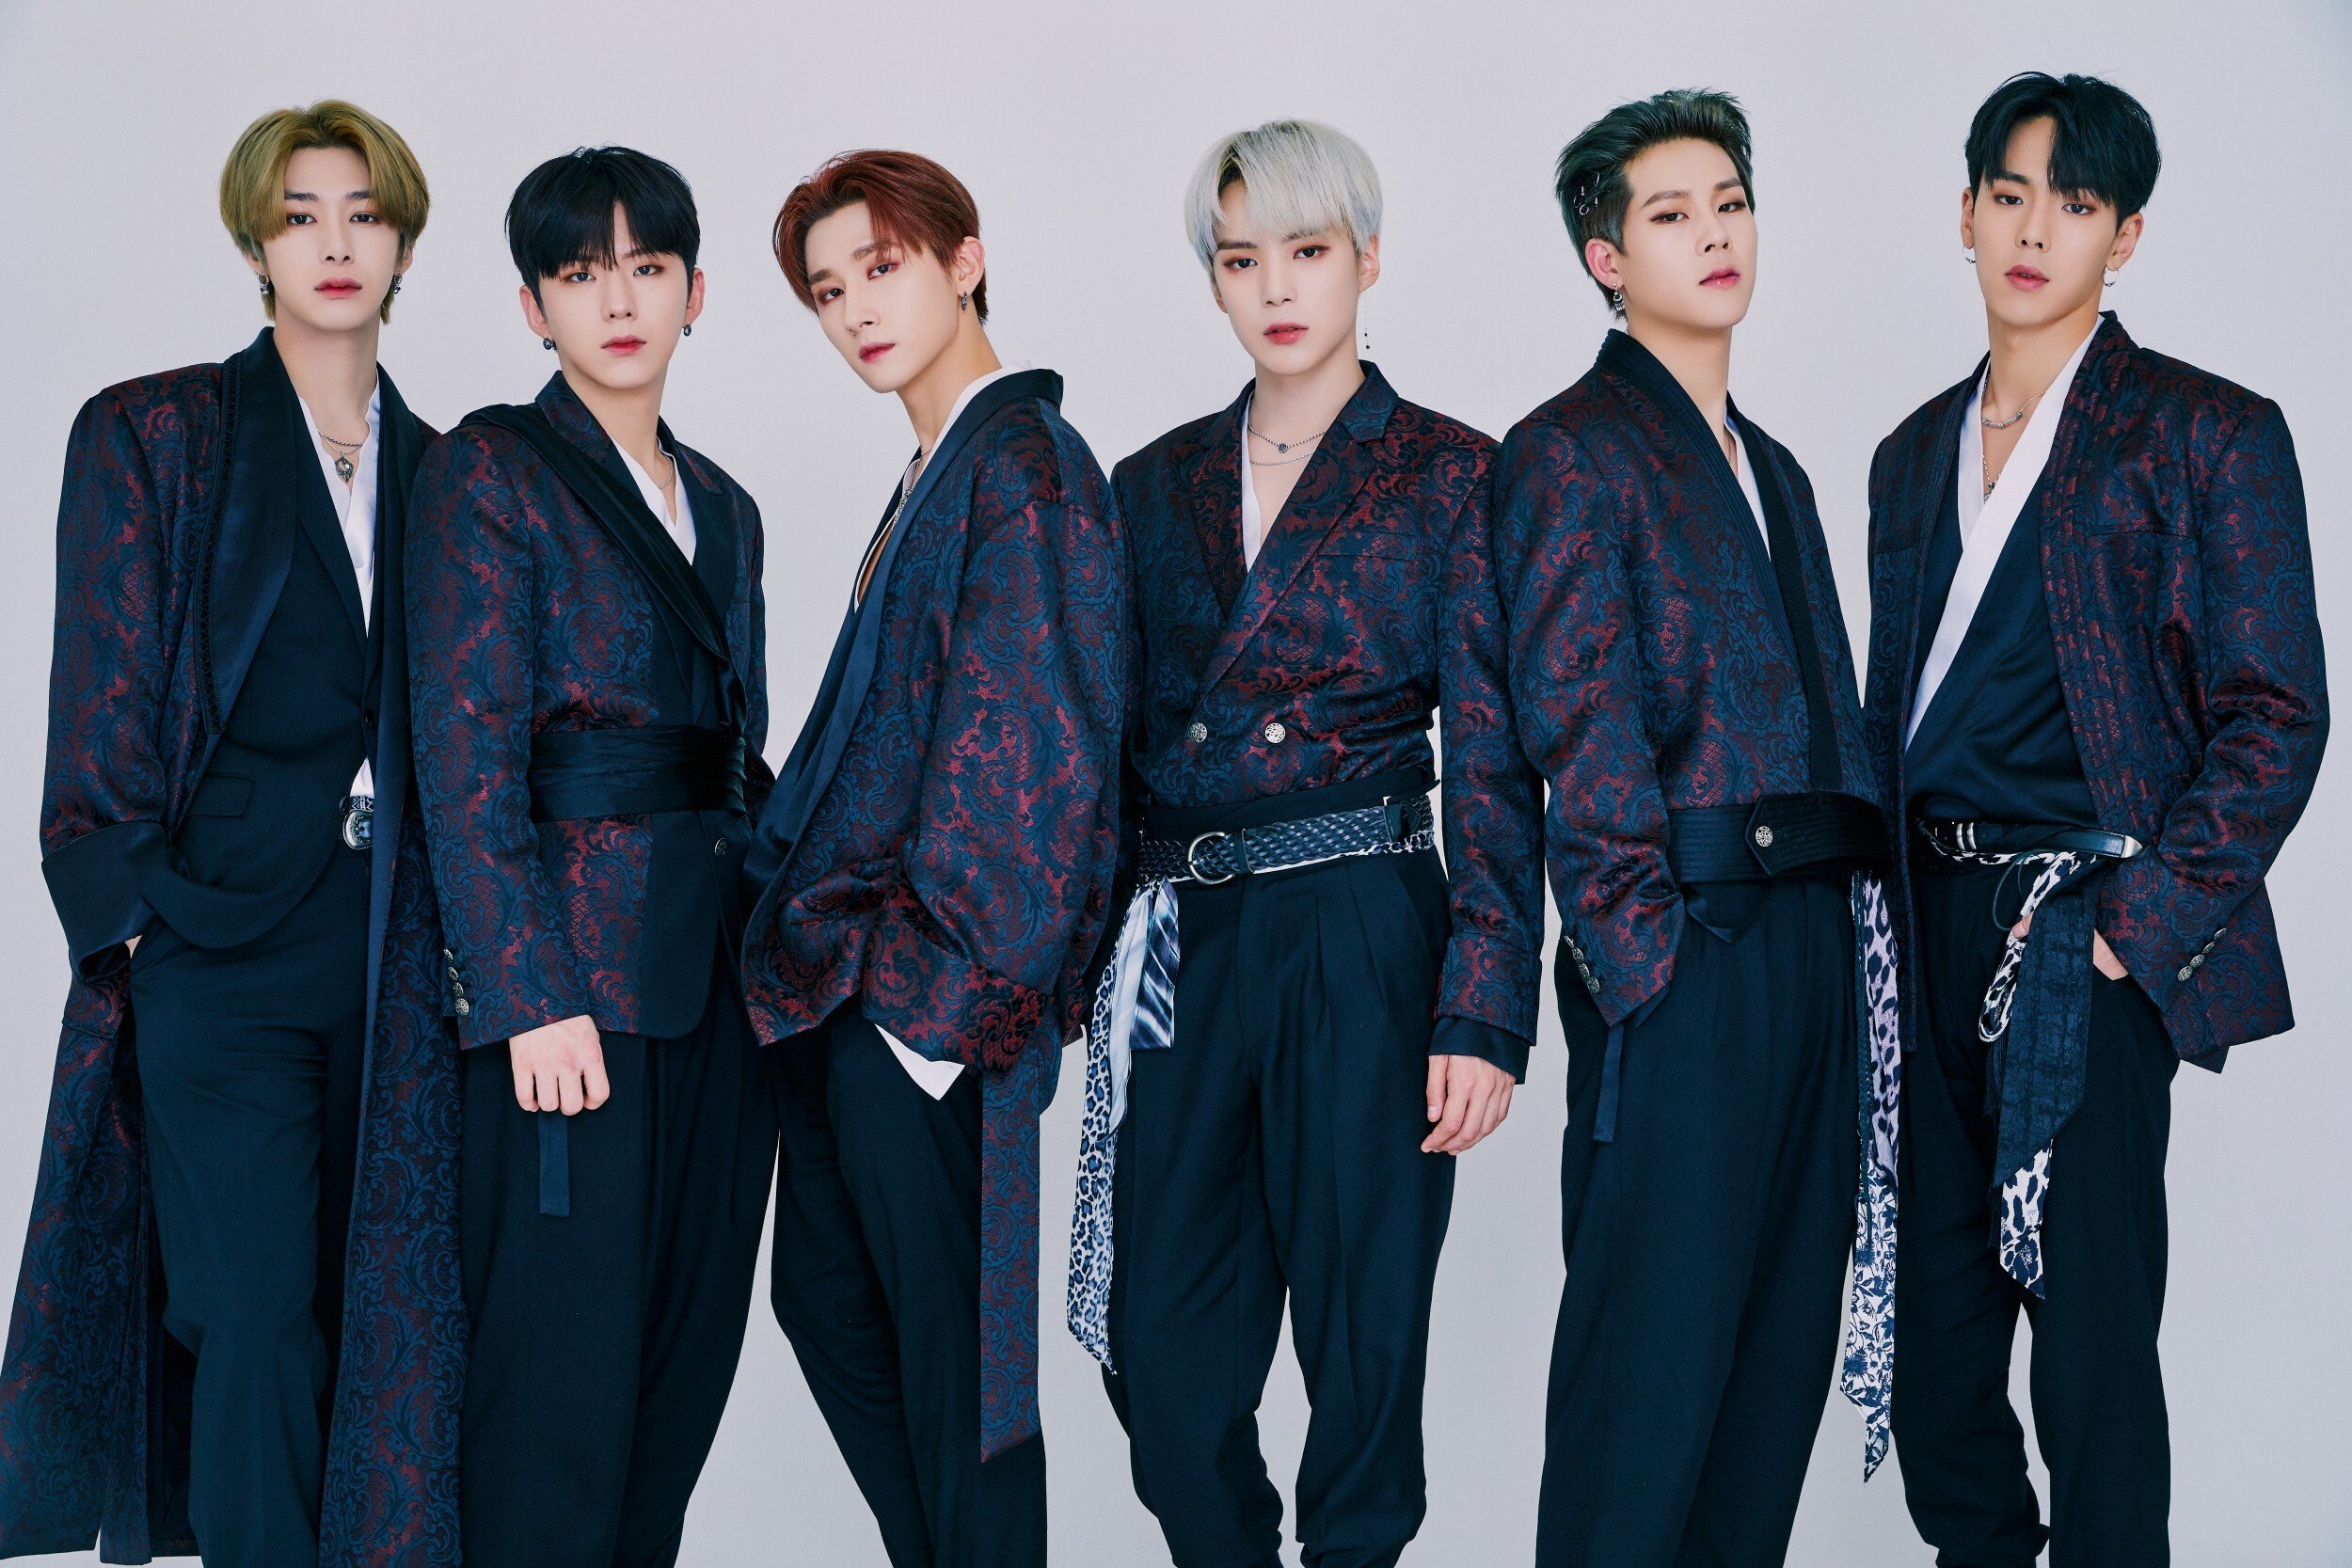 Monsta X are one of about 30 acts announced for the Kcon online concert series.